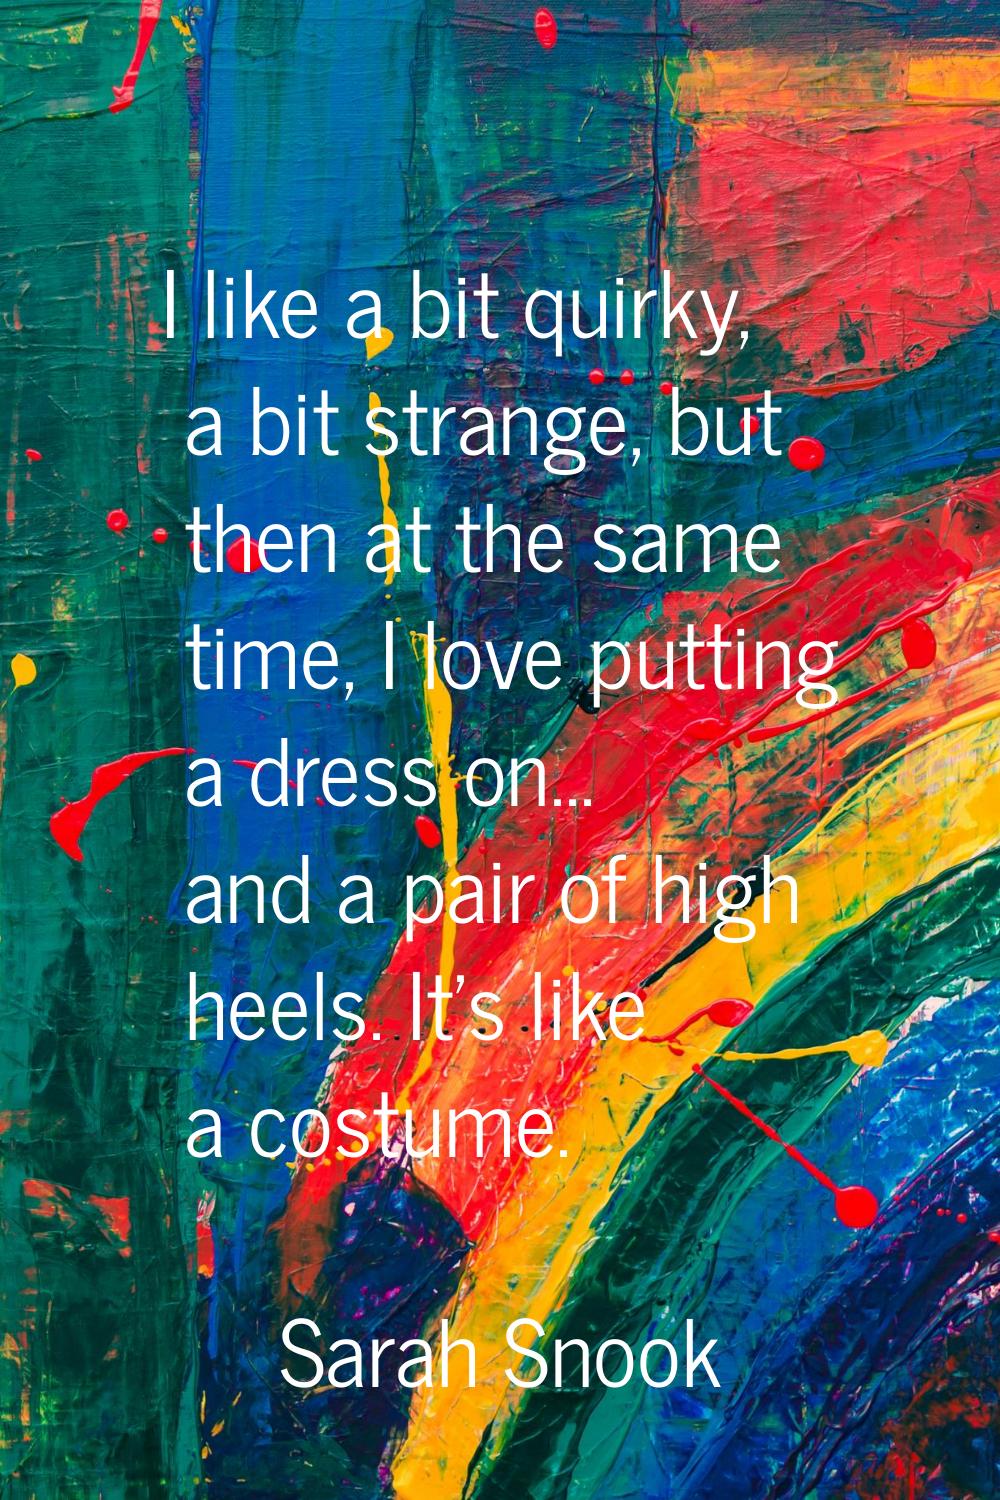 I like a bit quirky, a bit strange, but then at the same time, I love putting a dress on... and a p